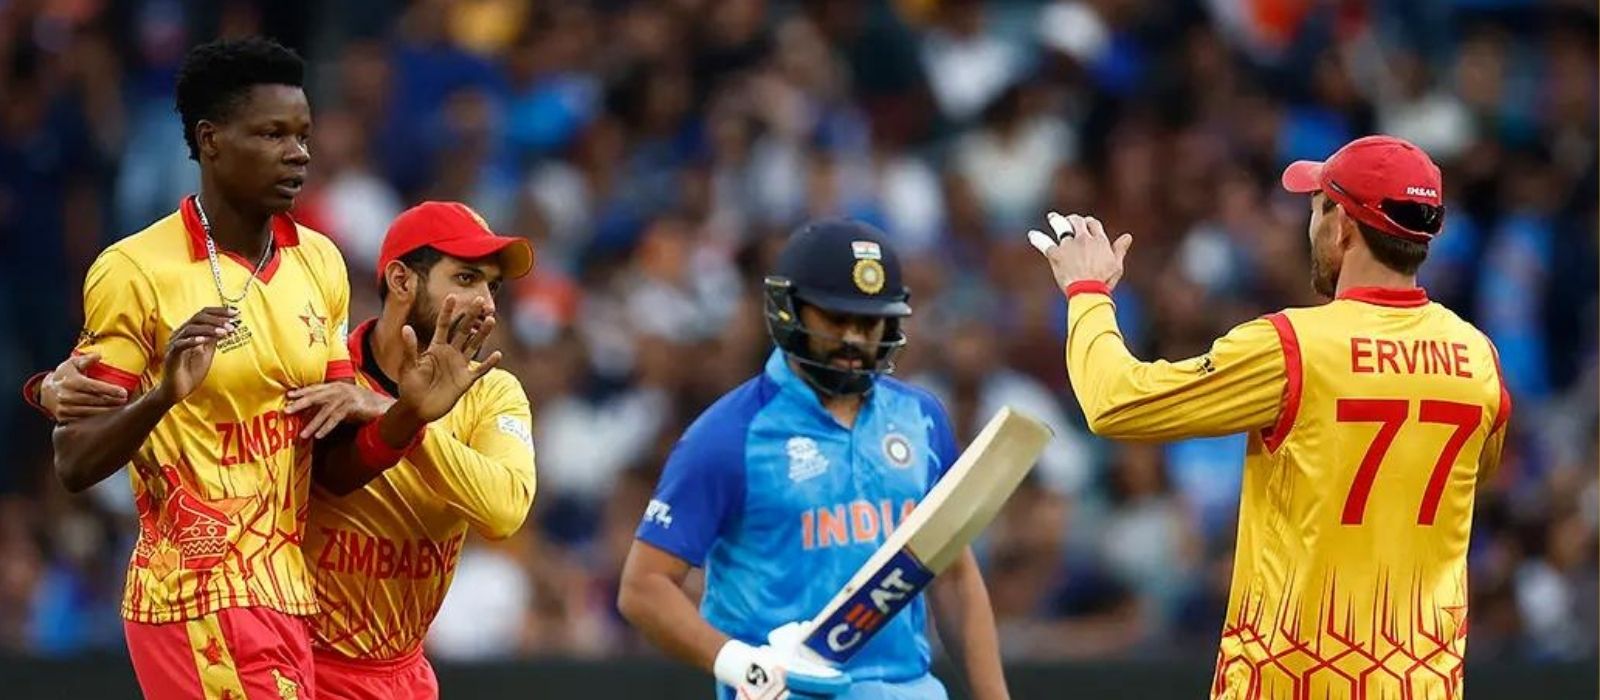 Chervons (Zimbabwe) to host team India in Harare